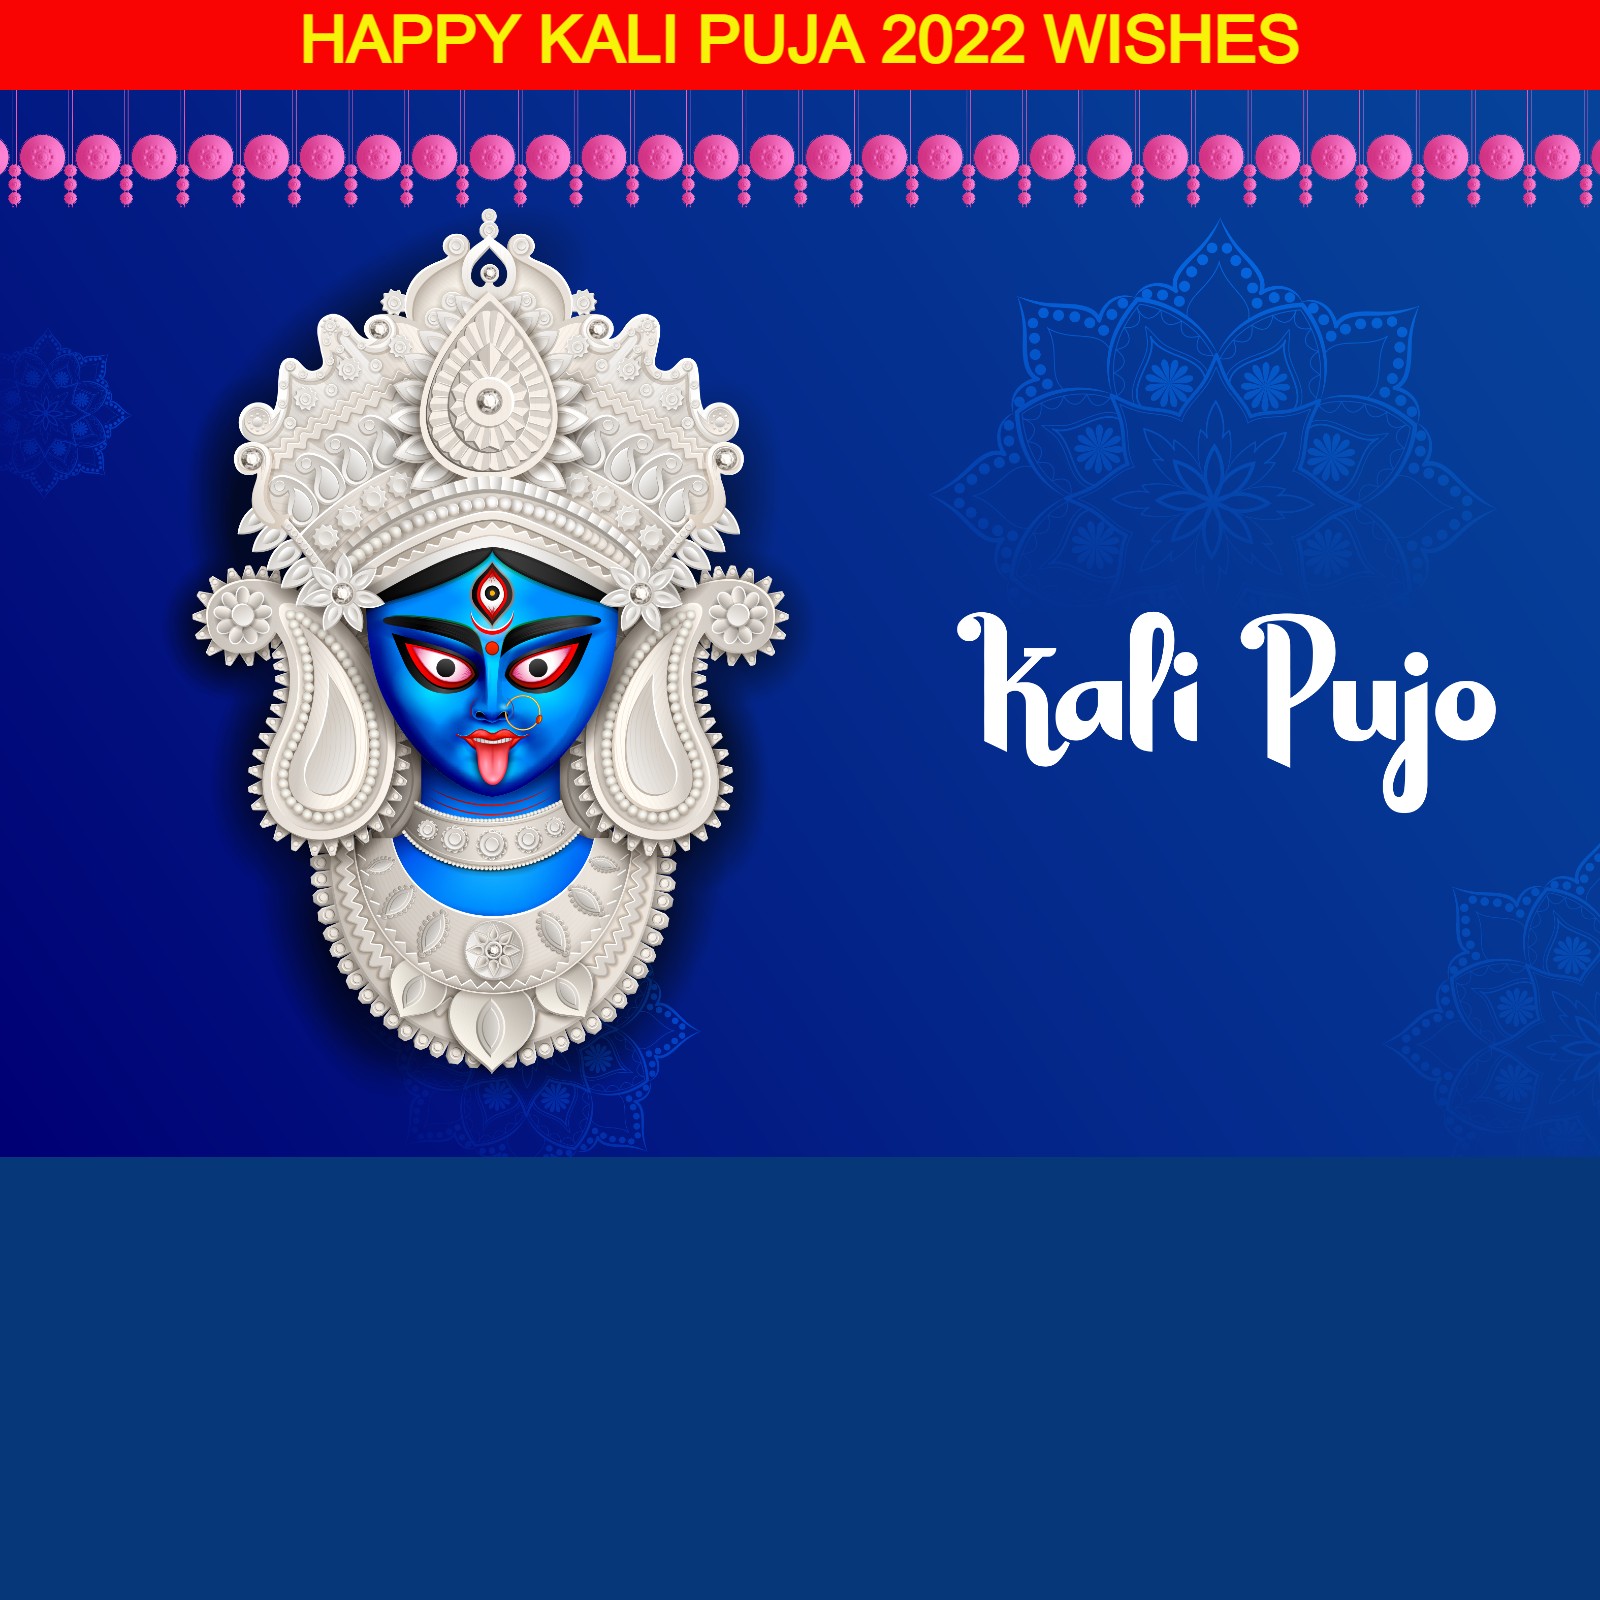 Happy Kali Puja 2022: Wishes, Images, Status, Quotes, Messages, Facebook  and WhatsApp Greetings to Share